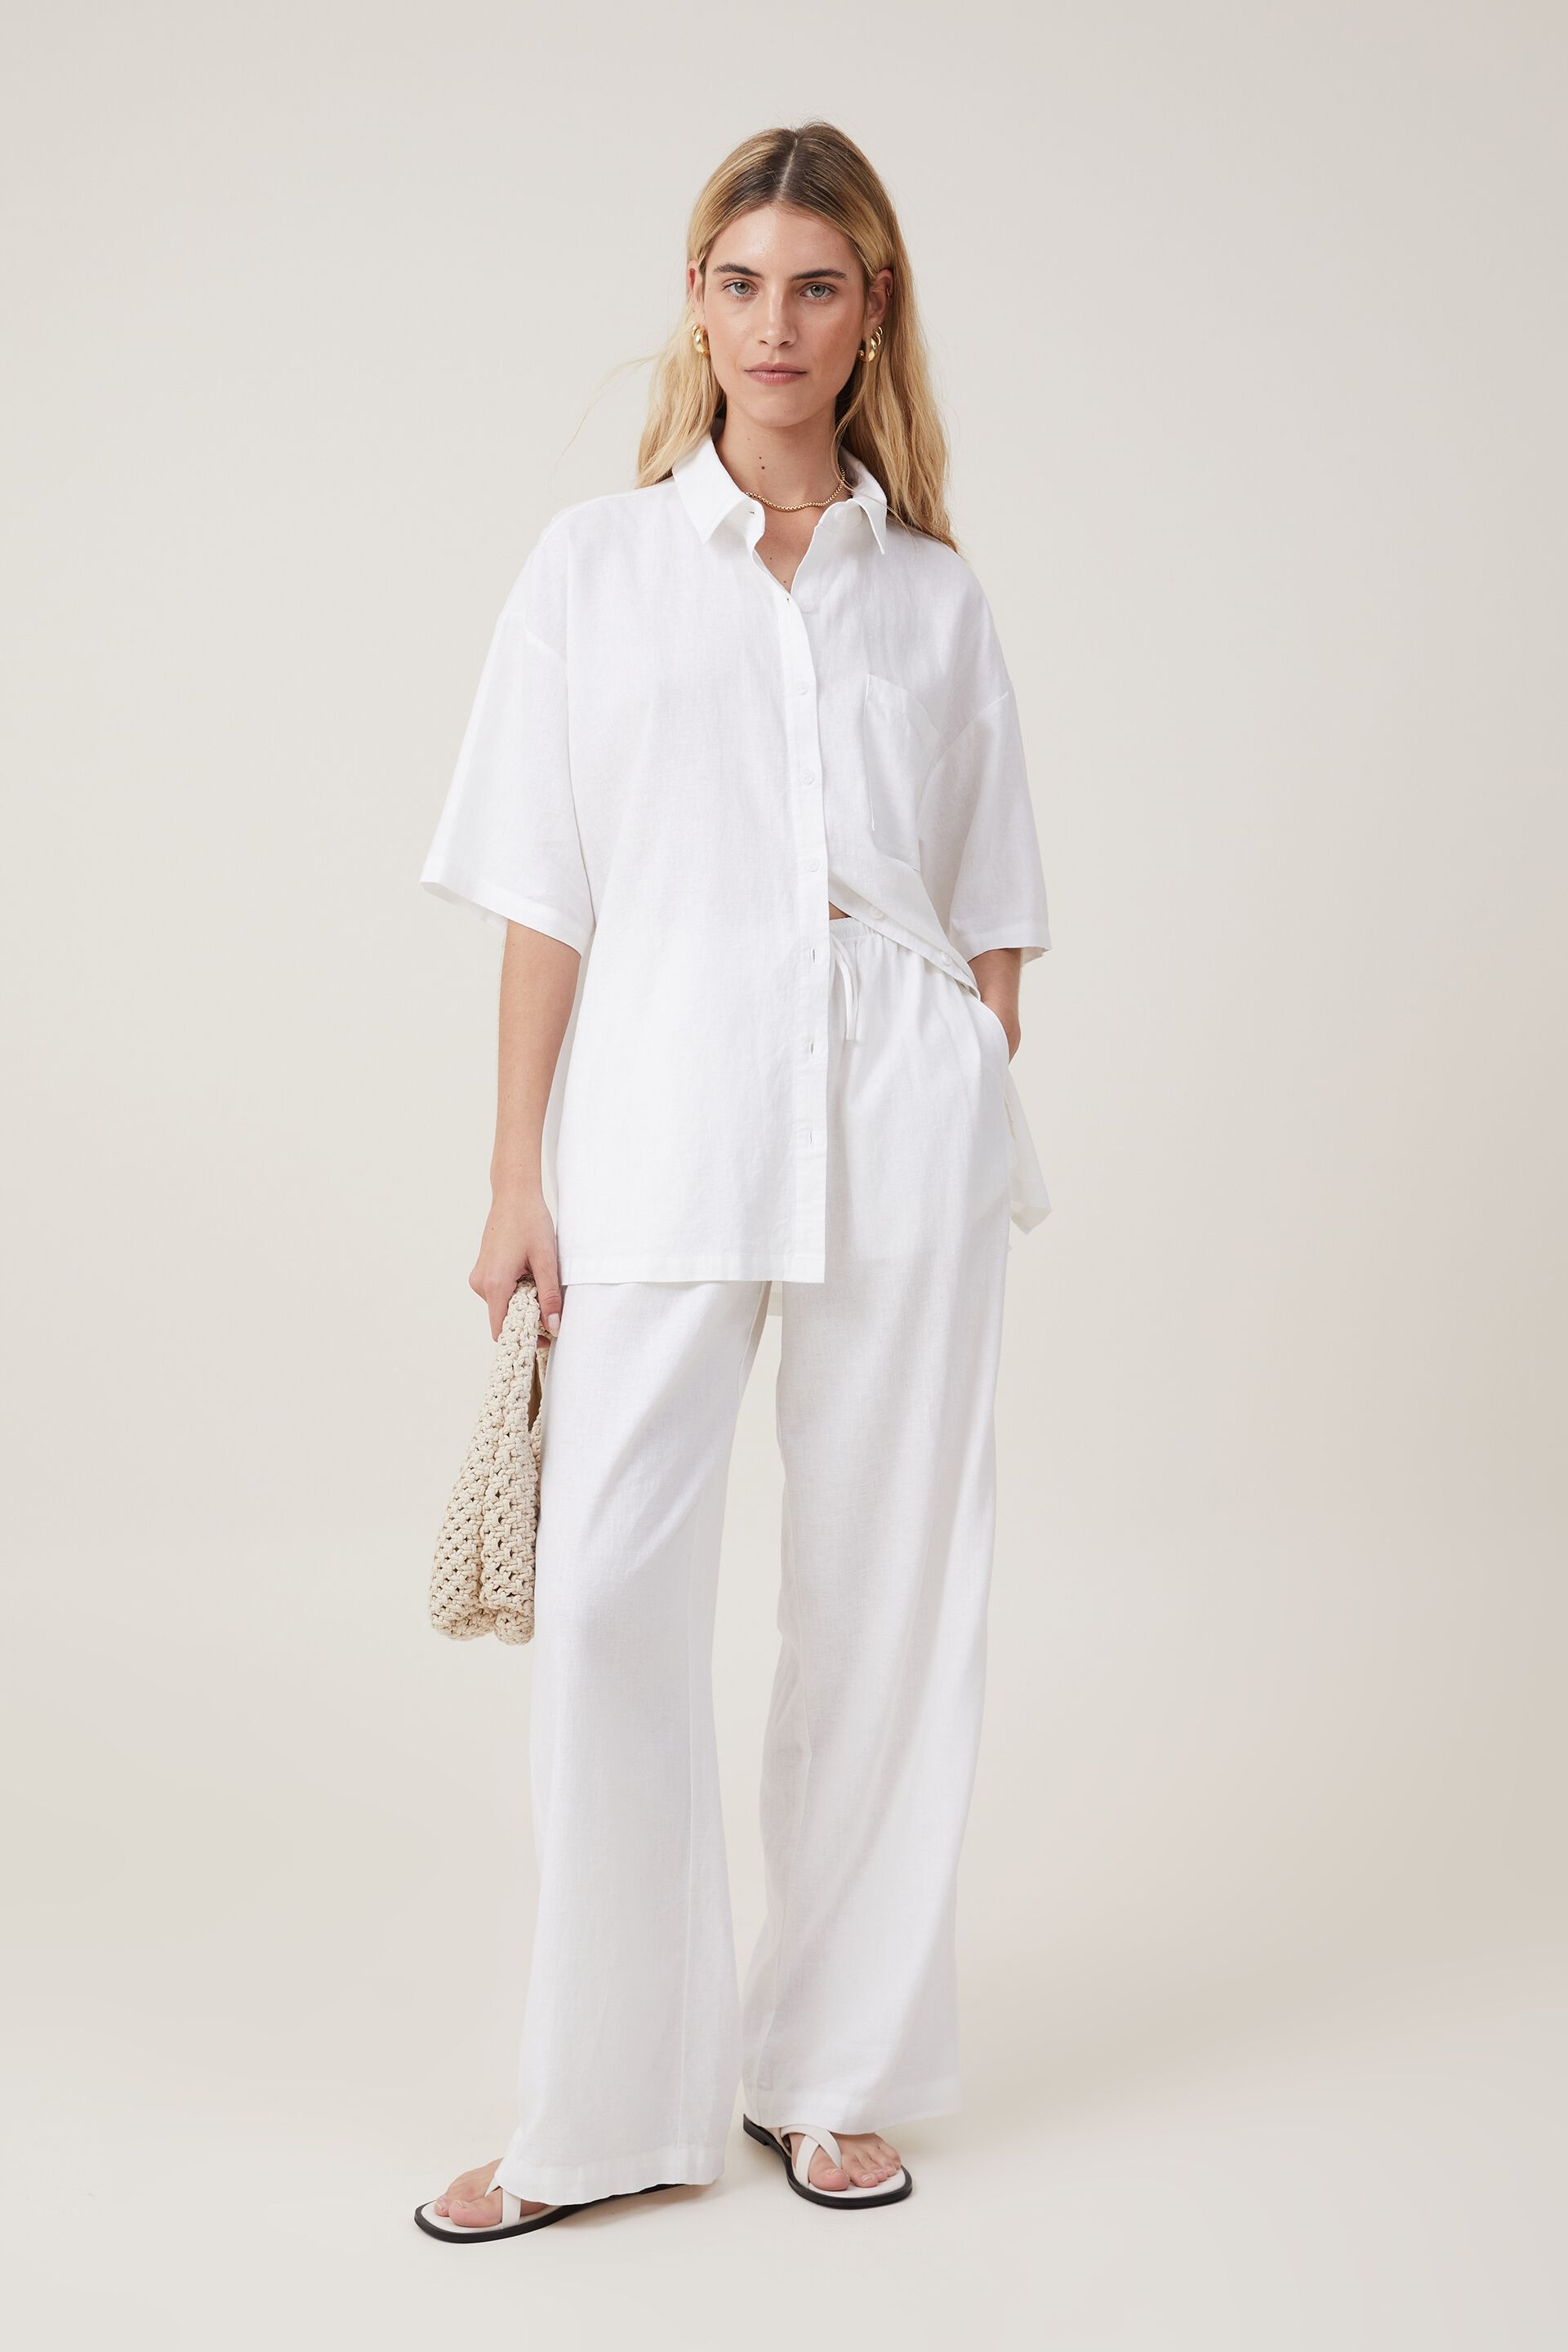 Buy Women Regular Fit Solid Trousers White Solid Cotton for Best Price,  Reviews, Free Shipping